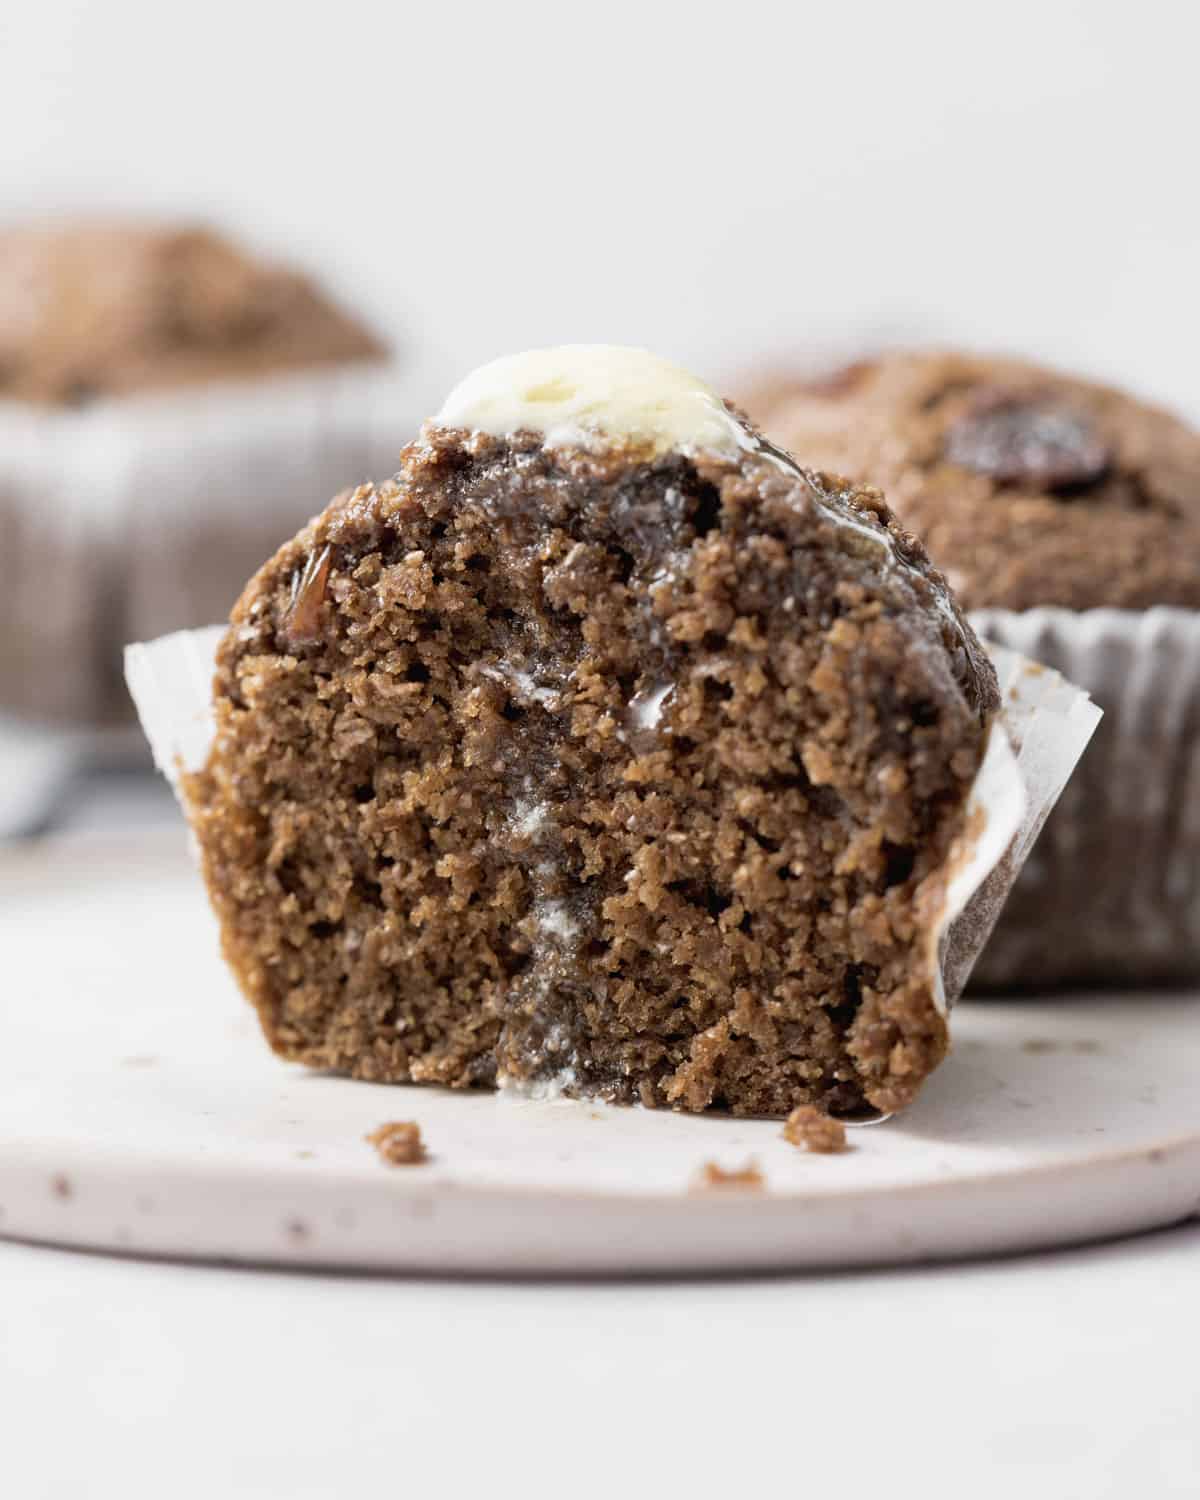 Bran muffin cut in half with melted butter dripping down.